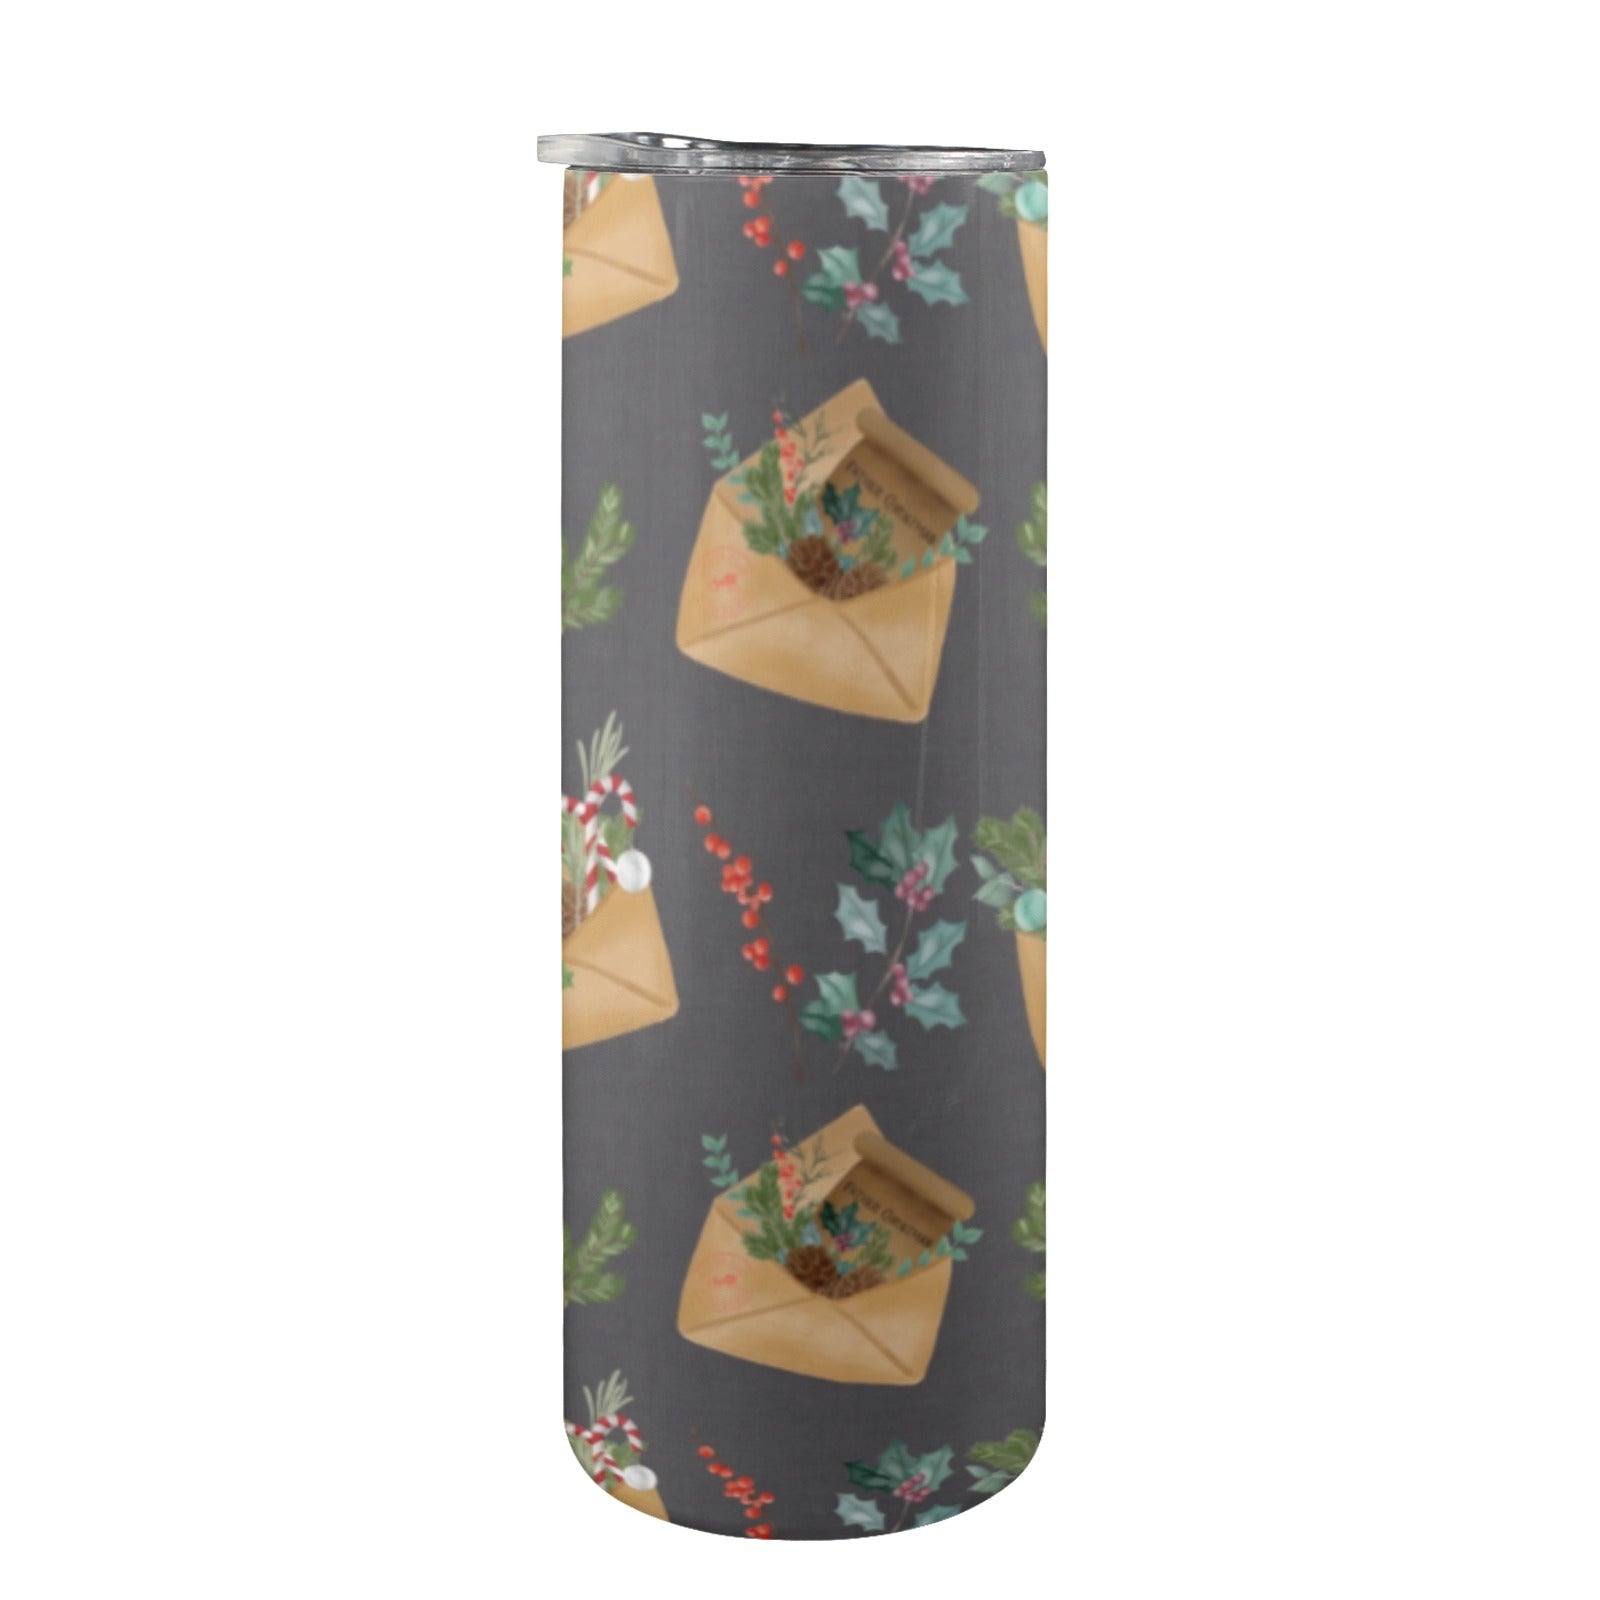 Christmas Themed Pint Insulated Stainless Steel Tumbler